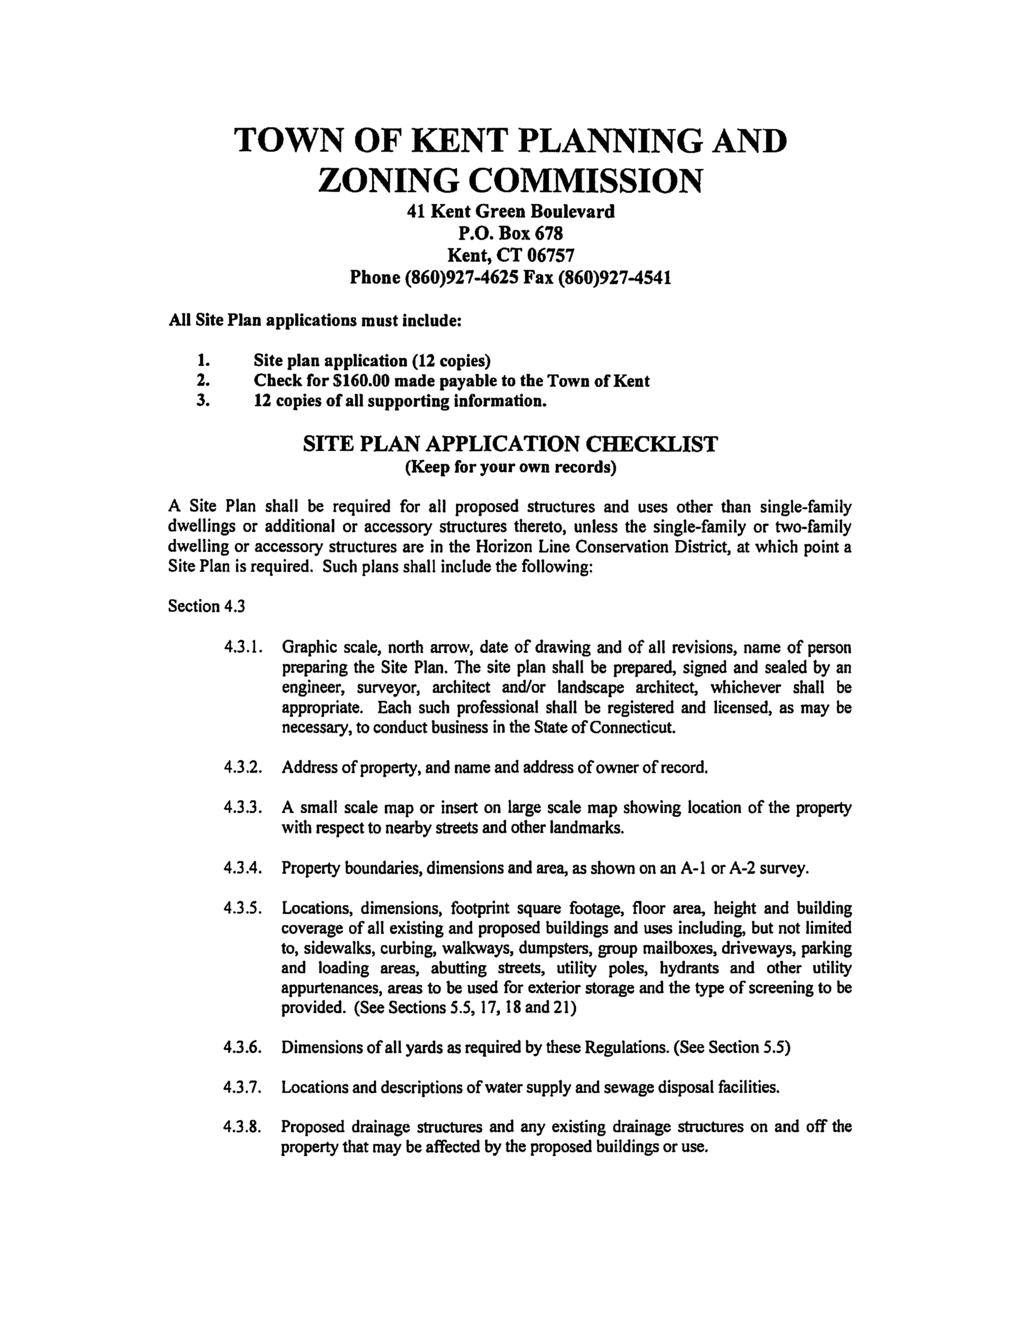 TOWN OF KENT PLANNING AND All Site Plan applications must include: ZONING COMMISSION 41 Kent Green Boulevard P.O. Box 678 Kent, CT 06757 Phone (860)927-4625 Fax (860)927-4541 1.